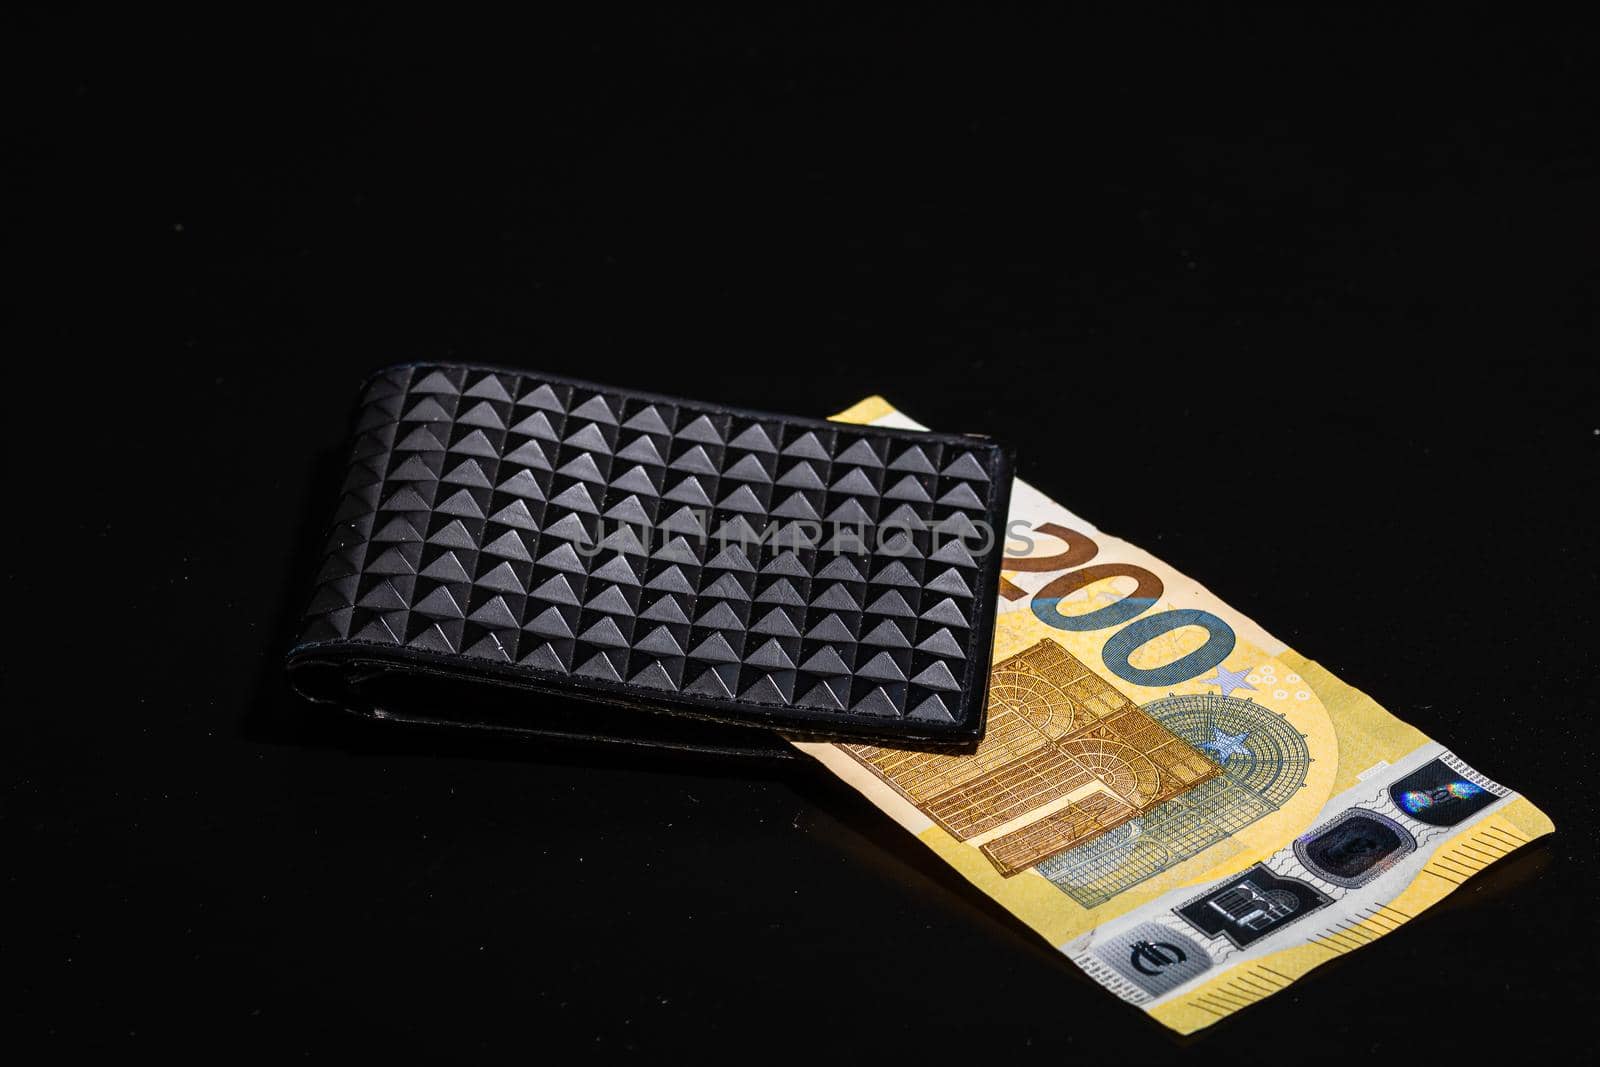 200 Euro banknotes in a black wallet isolated. by vladispas